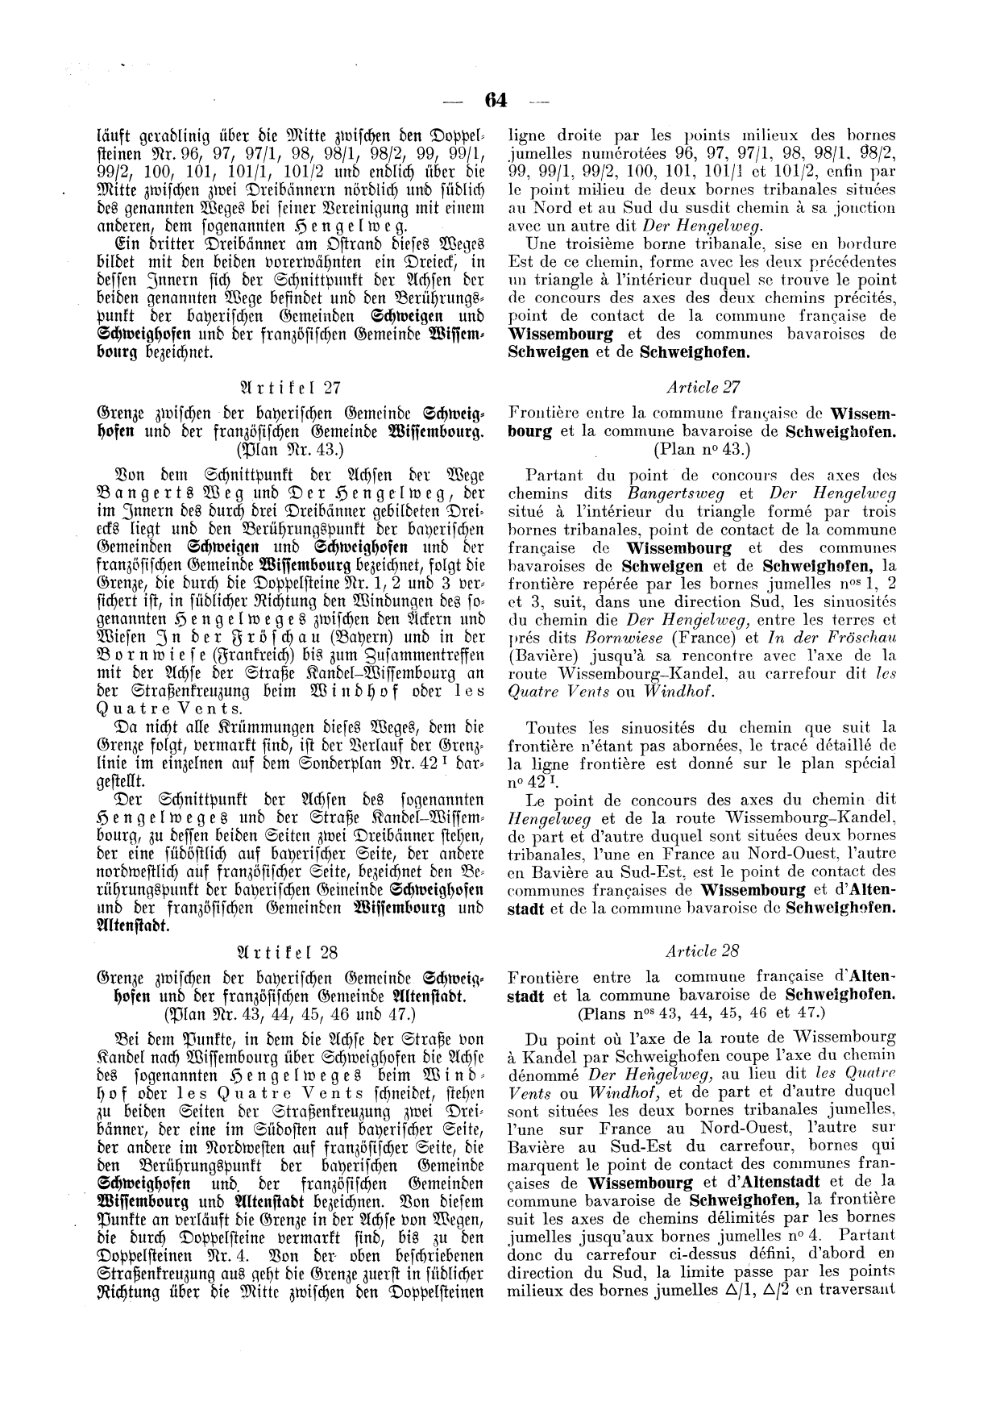 Scan of page 64